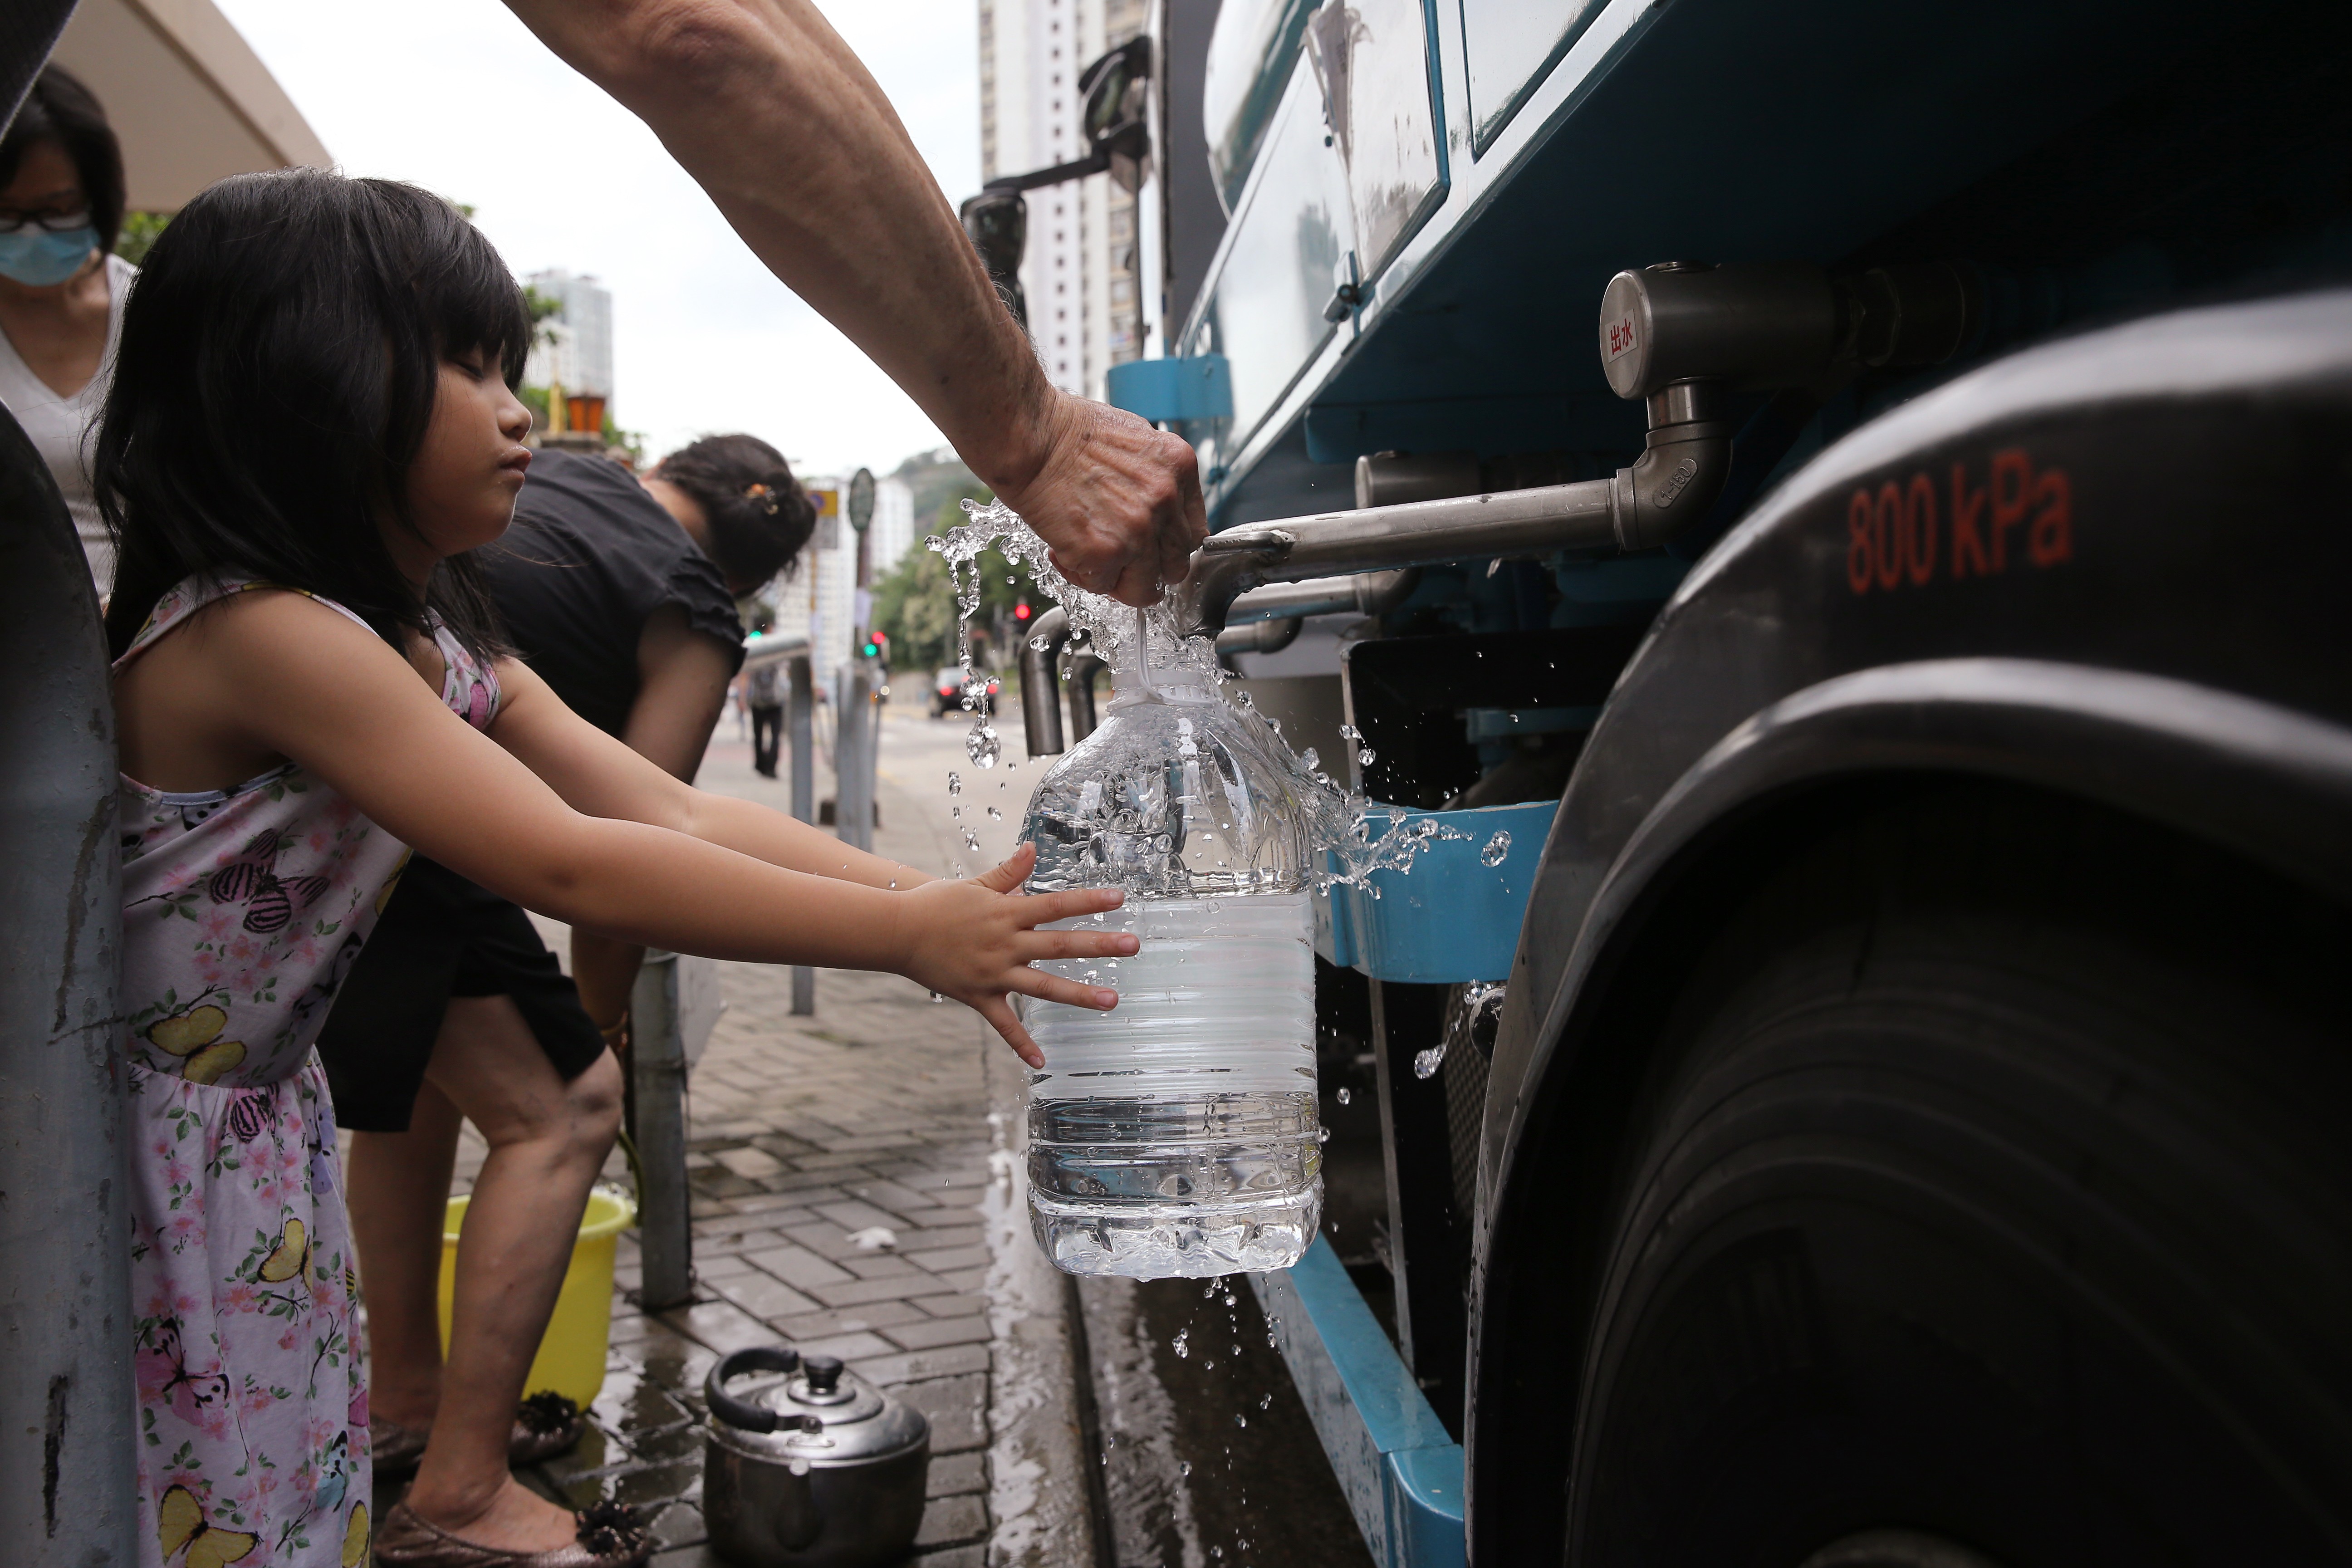 Residents fill up containers of drinking water from a temporary standpipe, after a partial power failure at Hiu Kwong Street in Sau Mau Ping in June 2016. Photo: Sam Tsang